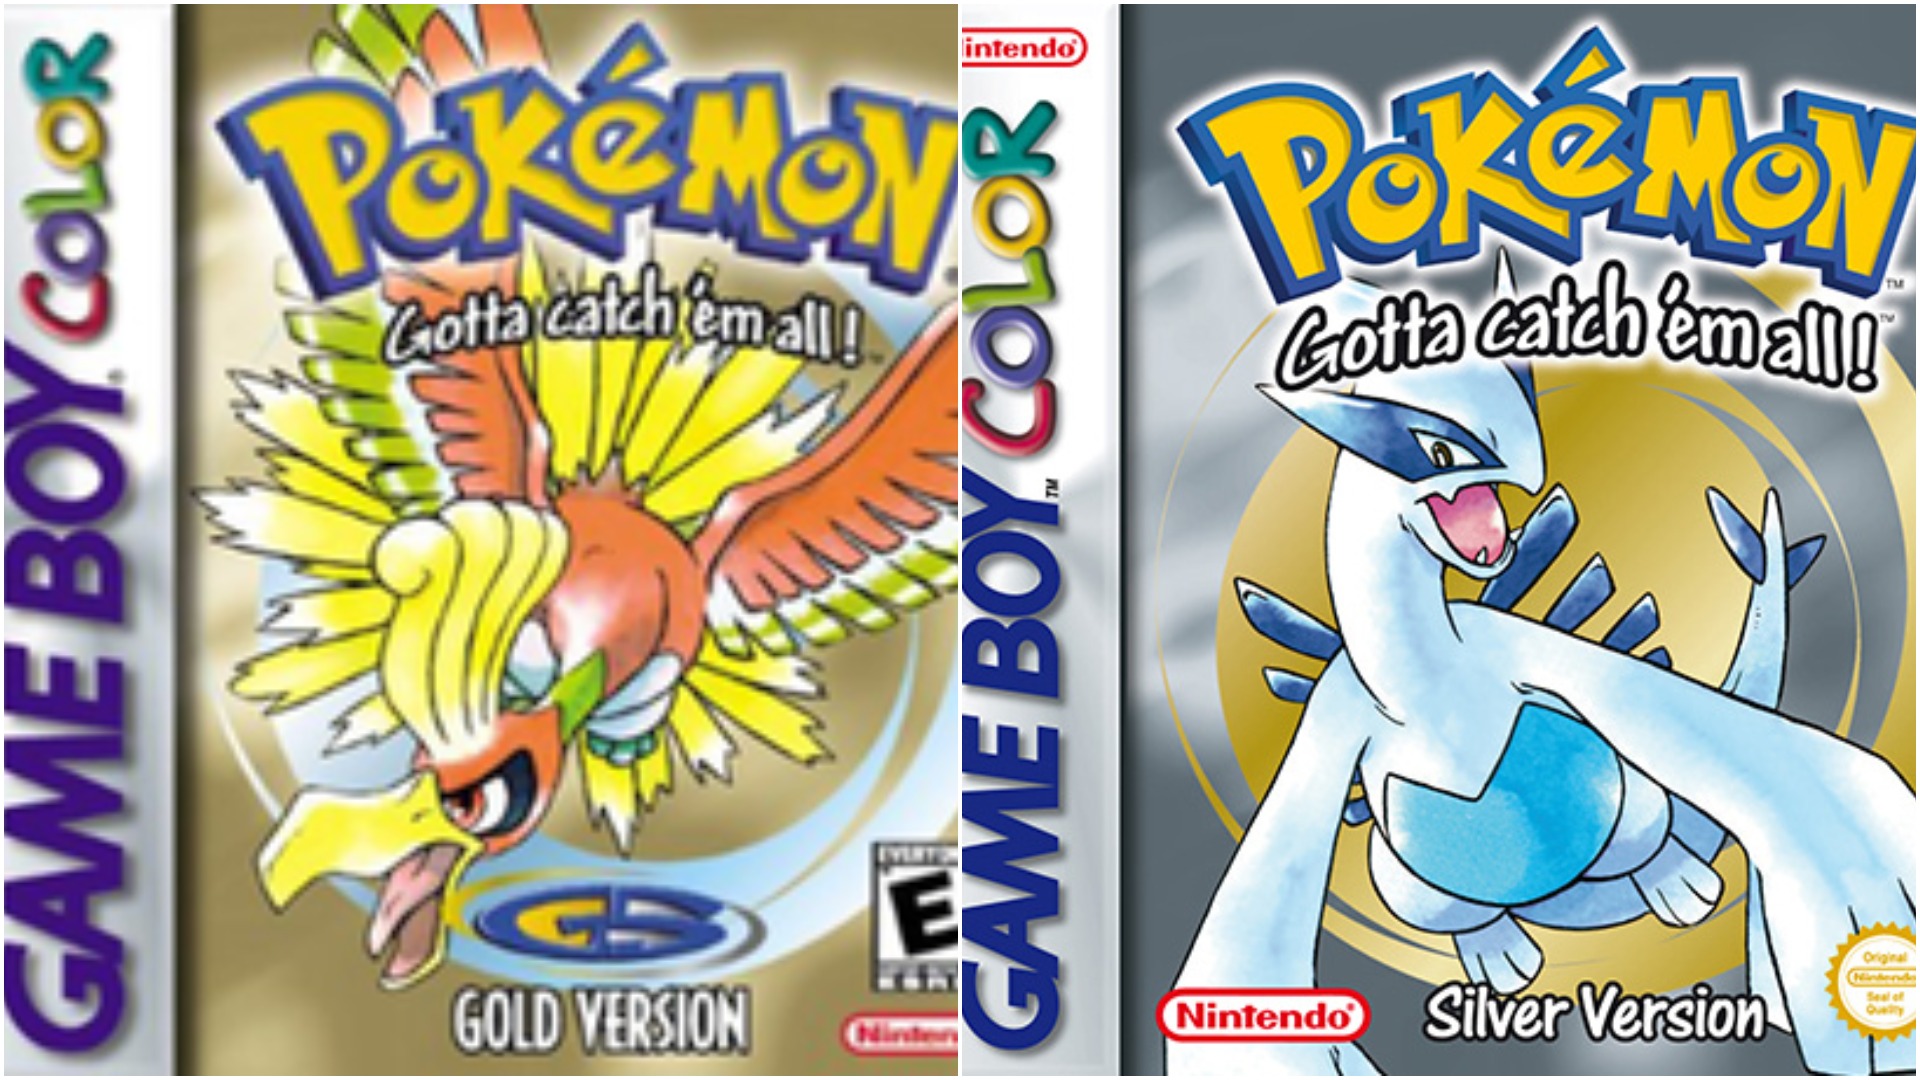  The best Pokémon games, ranked from best to worst